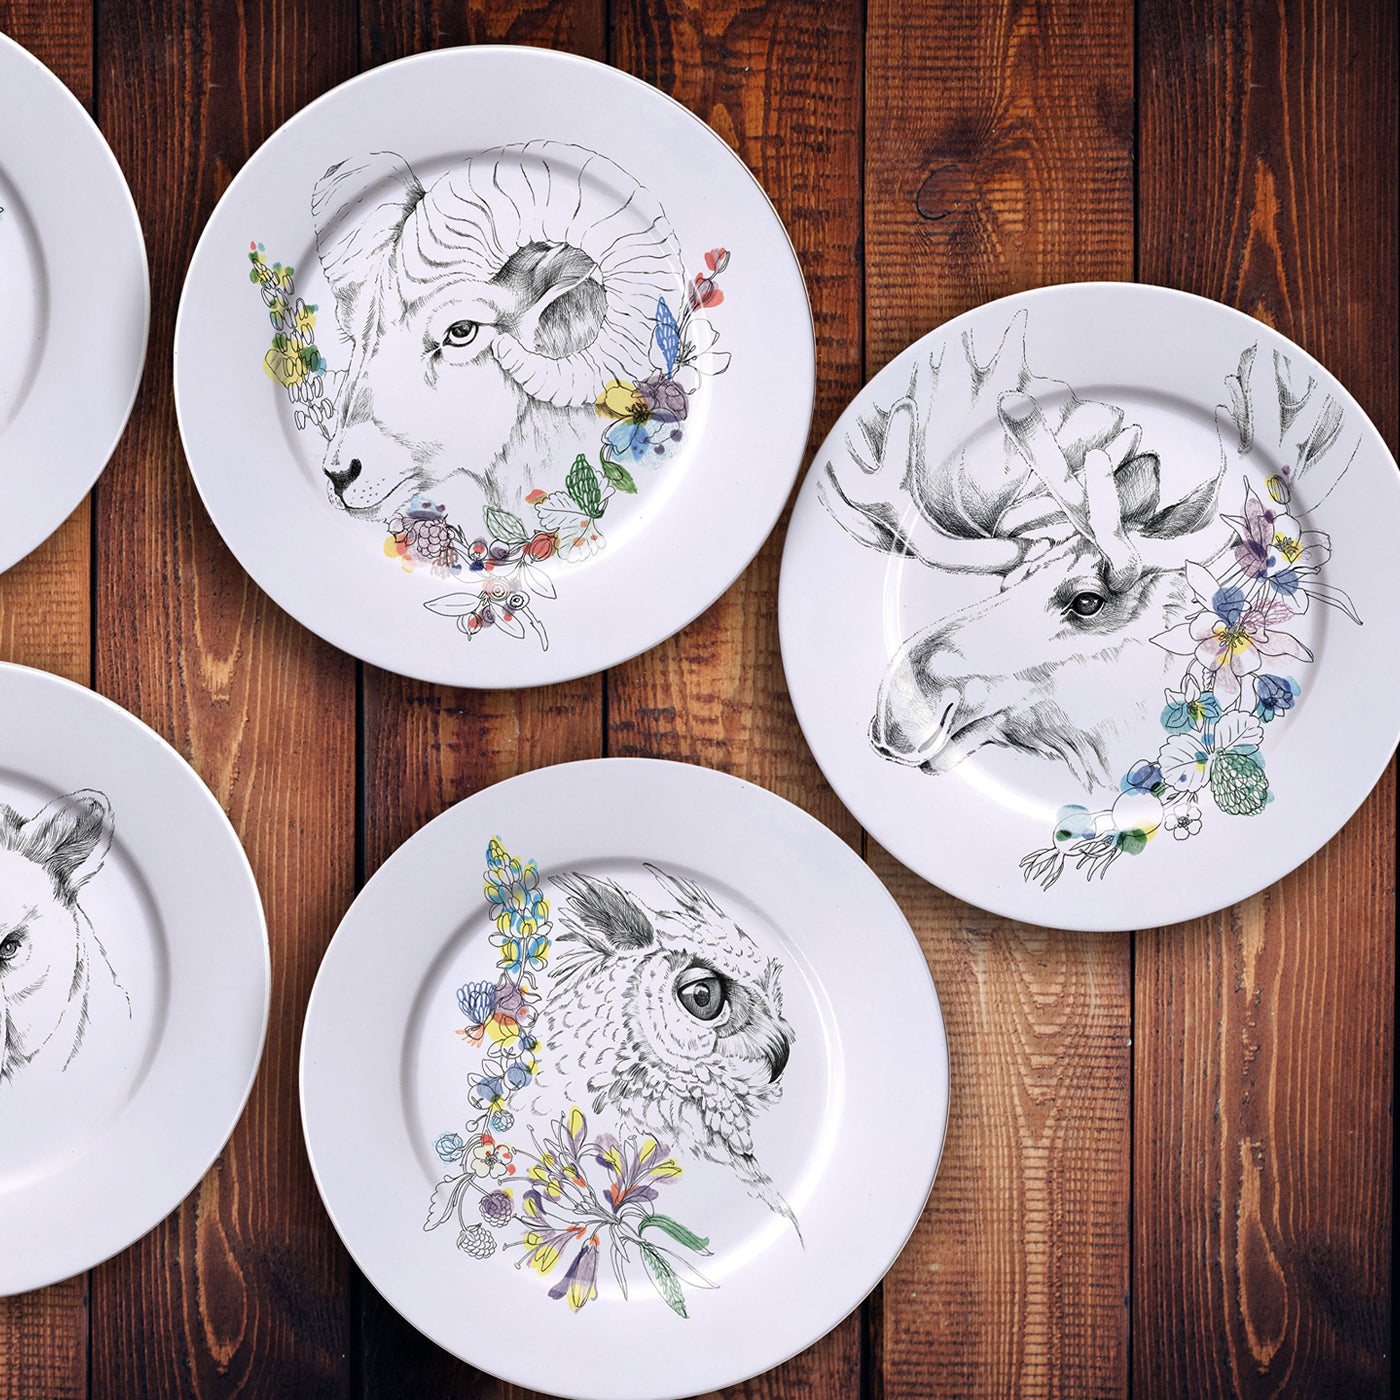 An Ode To The Woods Big Horn Sheep Dinner Plate - Alternative view 1